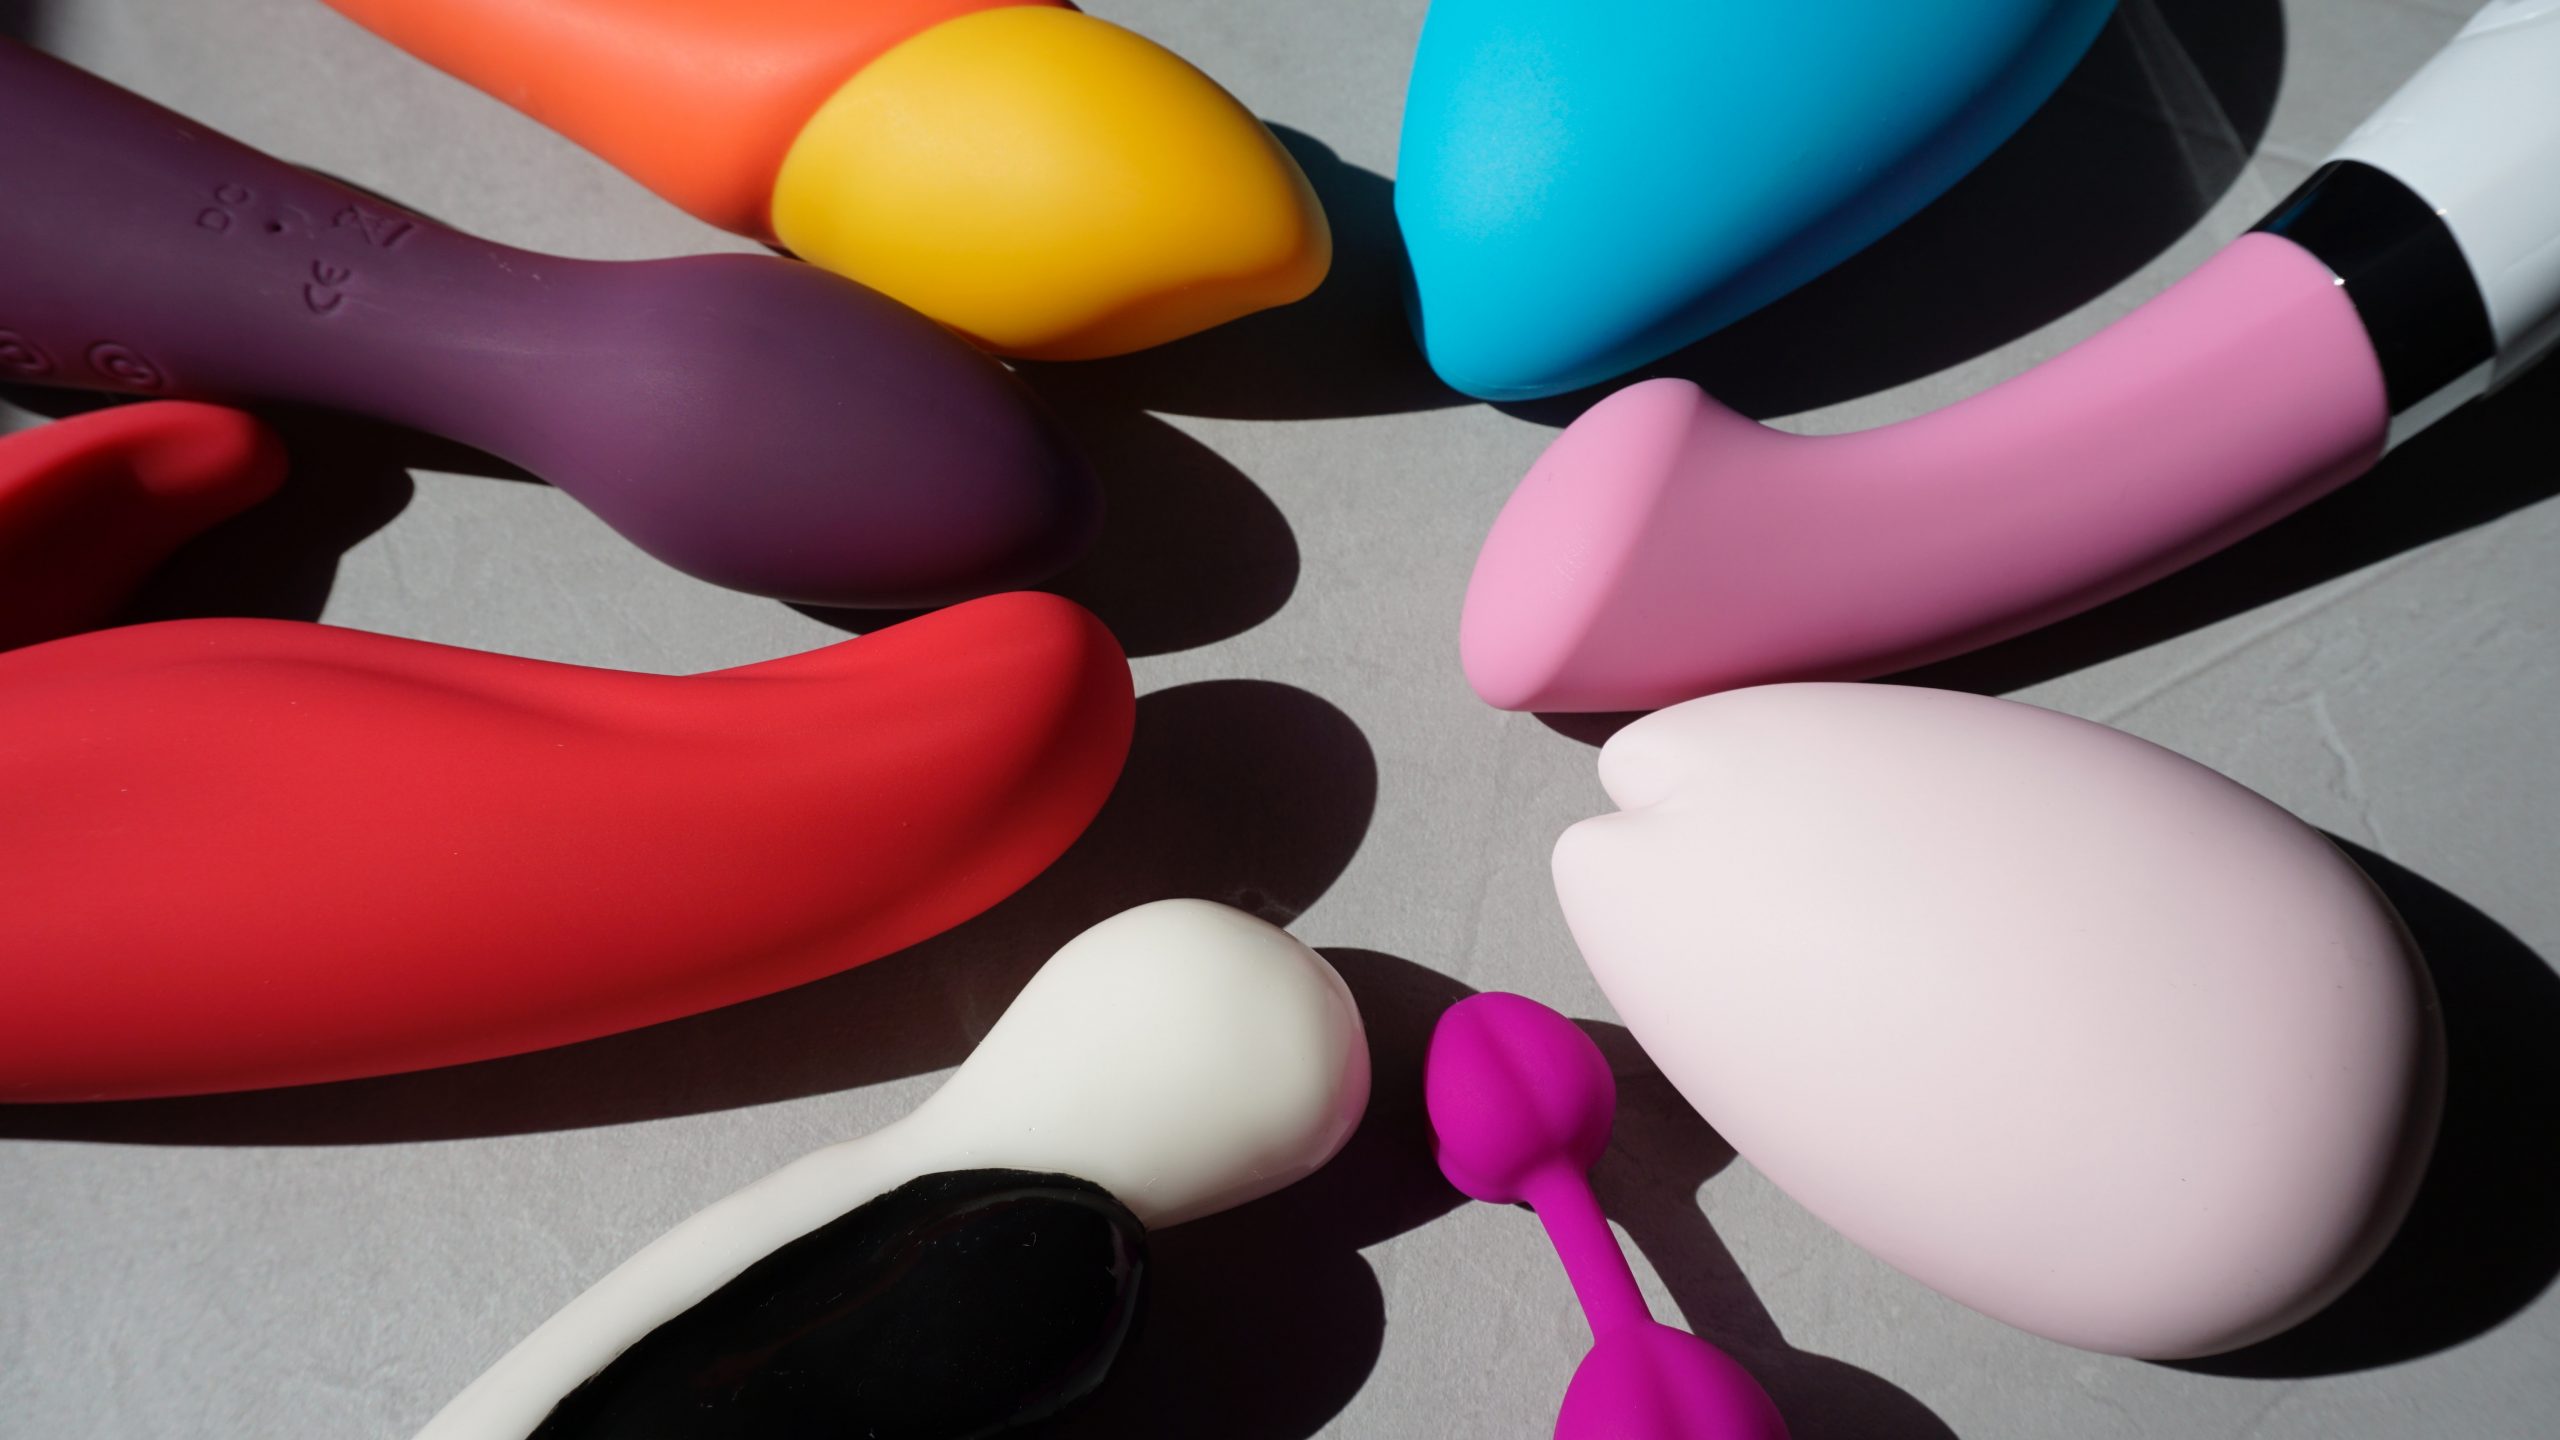 different types of sex toys